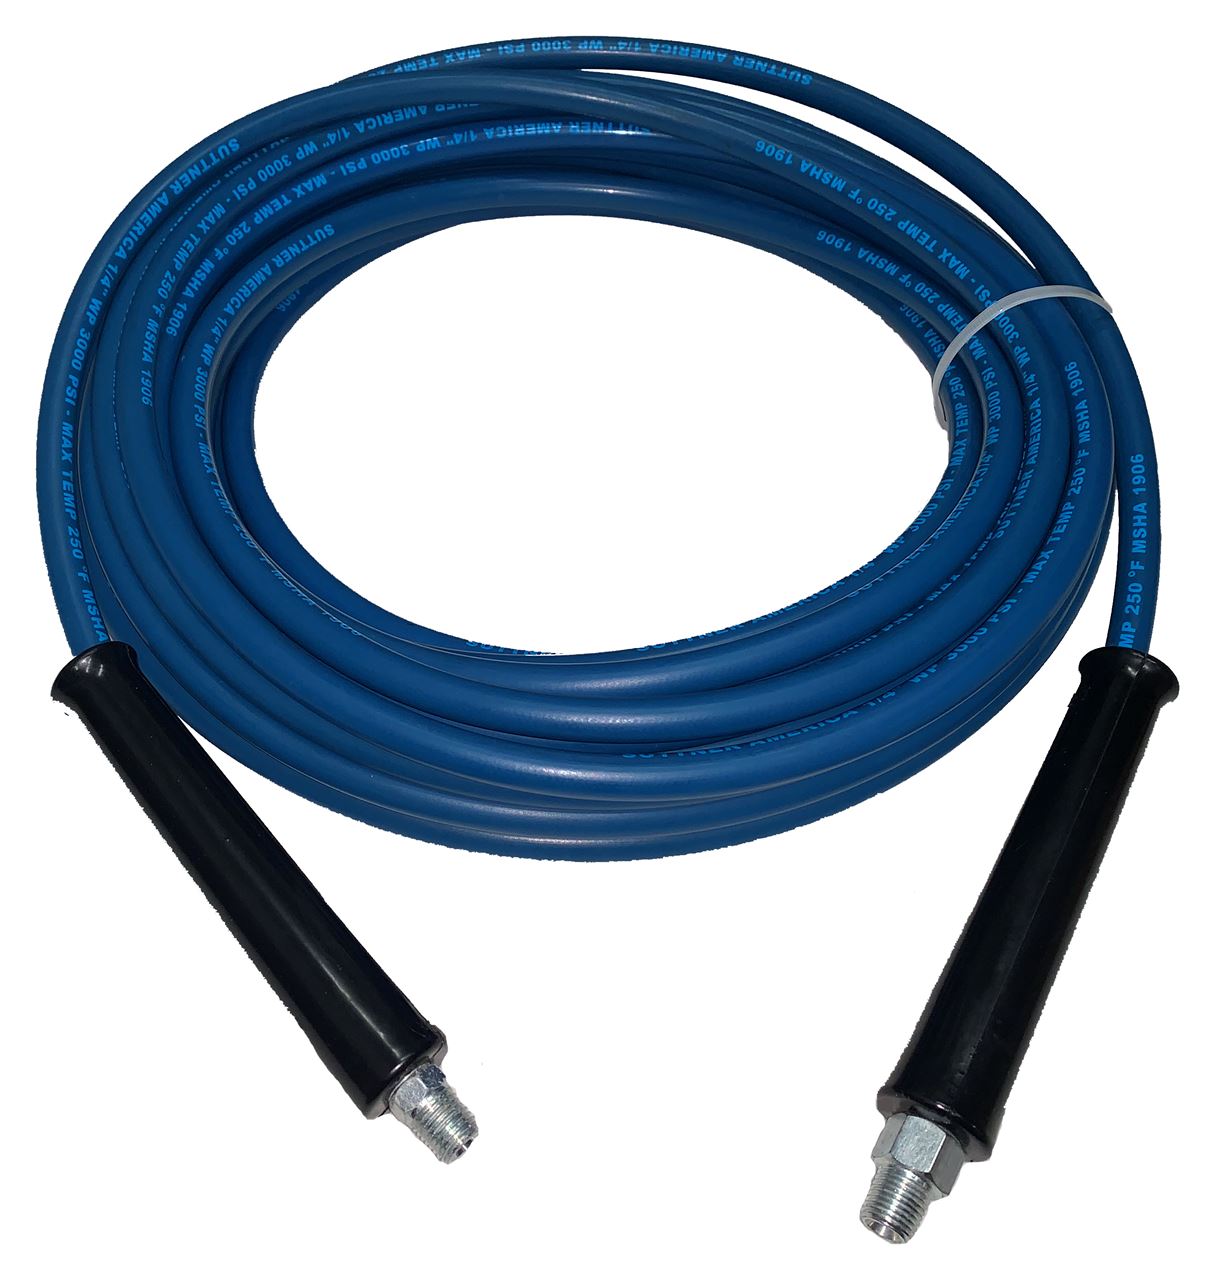 100' CARPET CLEANING HIGH PRESSURE SOLUTION HOSE 1/4" BLUE NEW 3000 PSI 